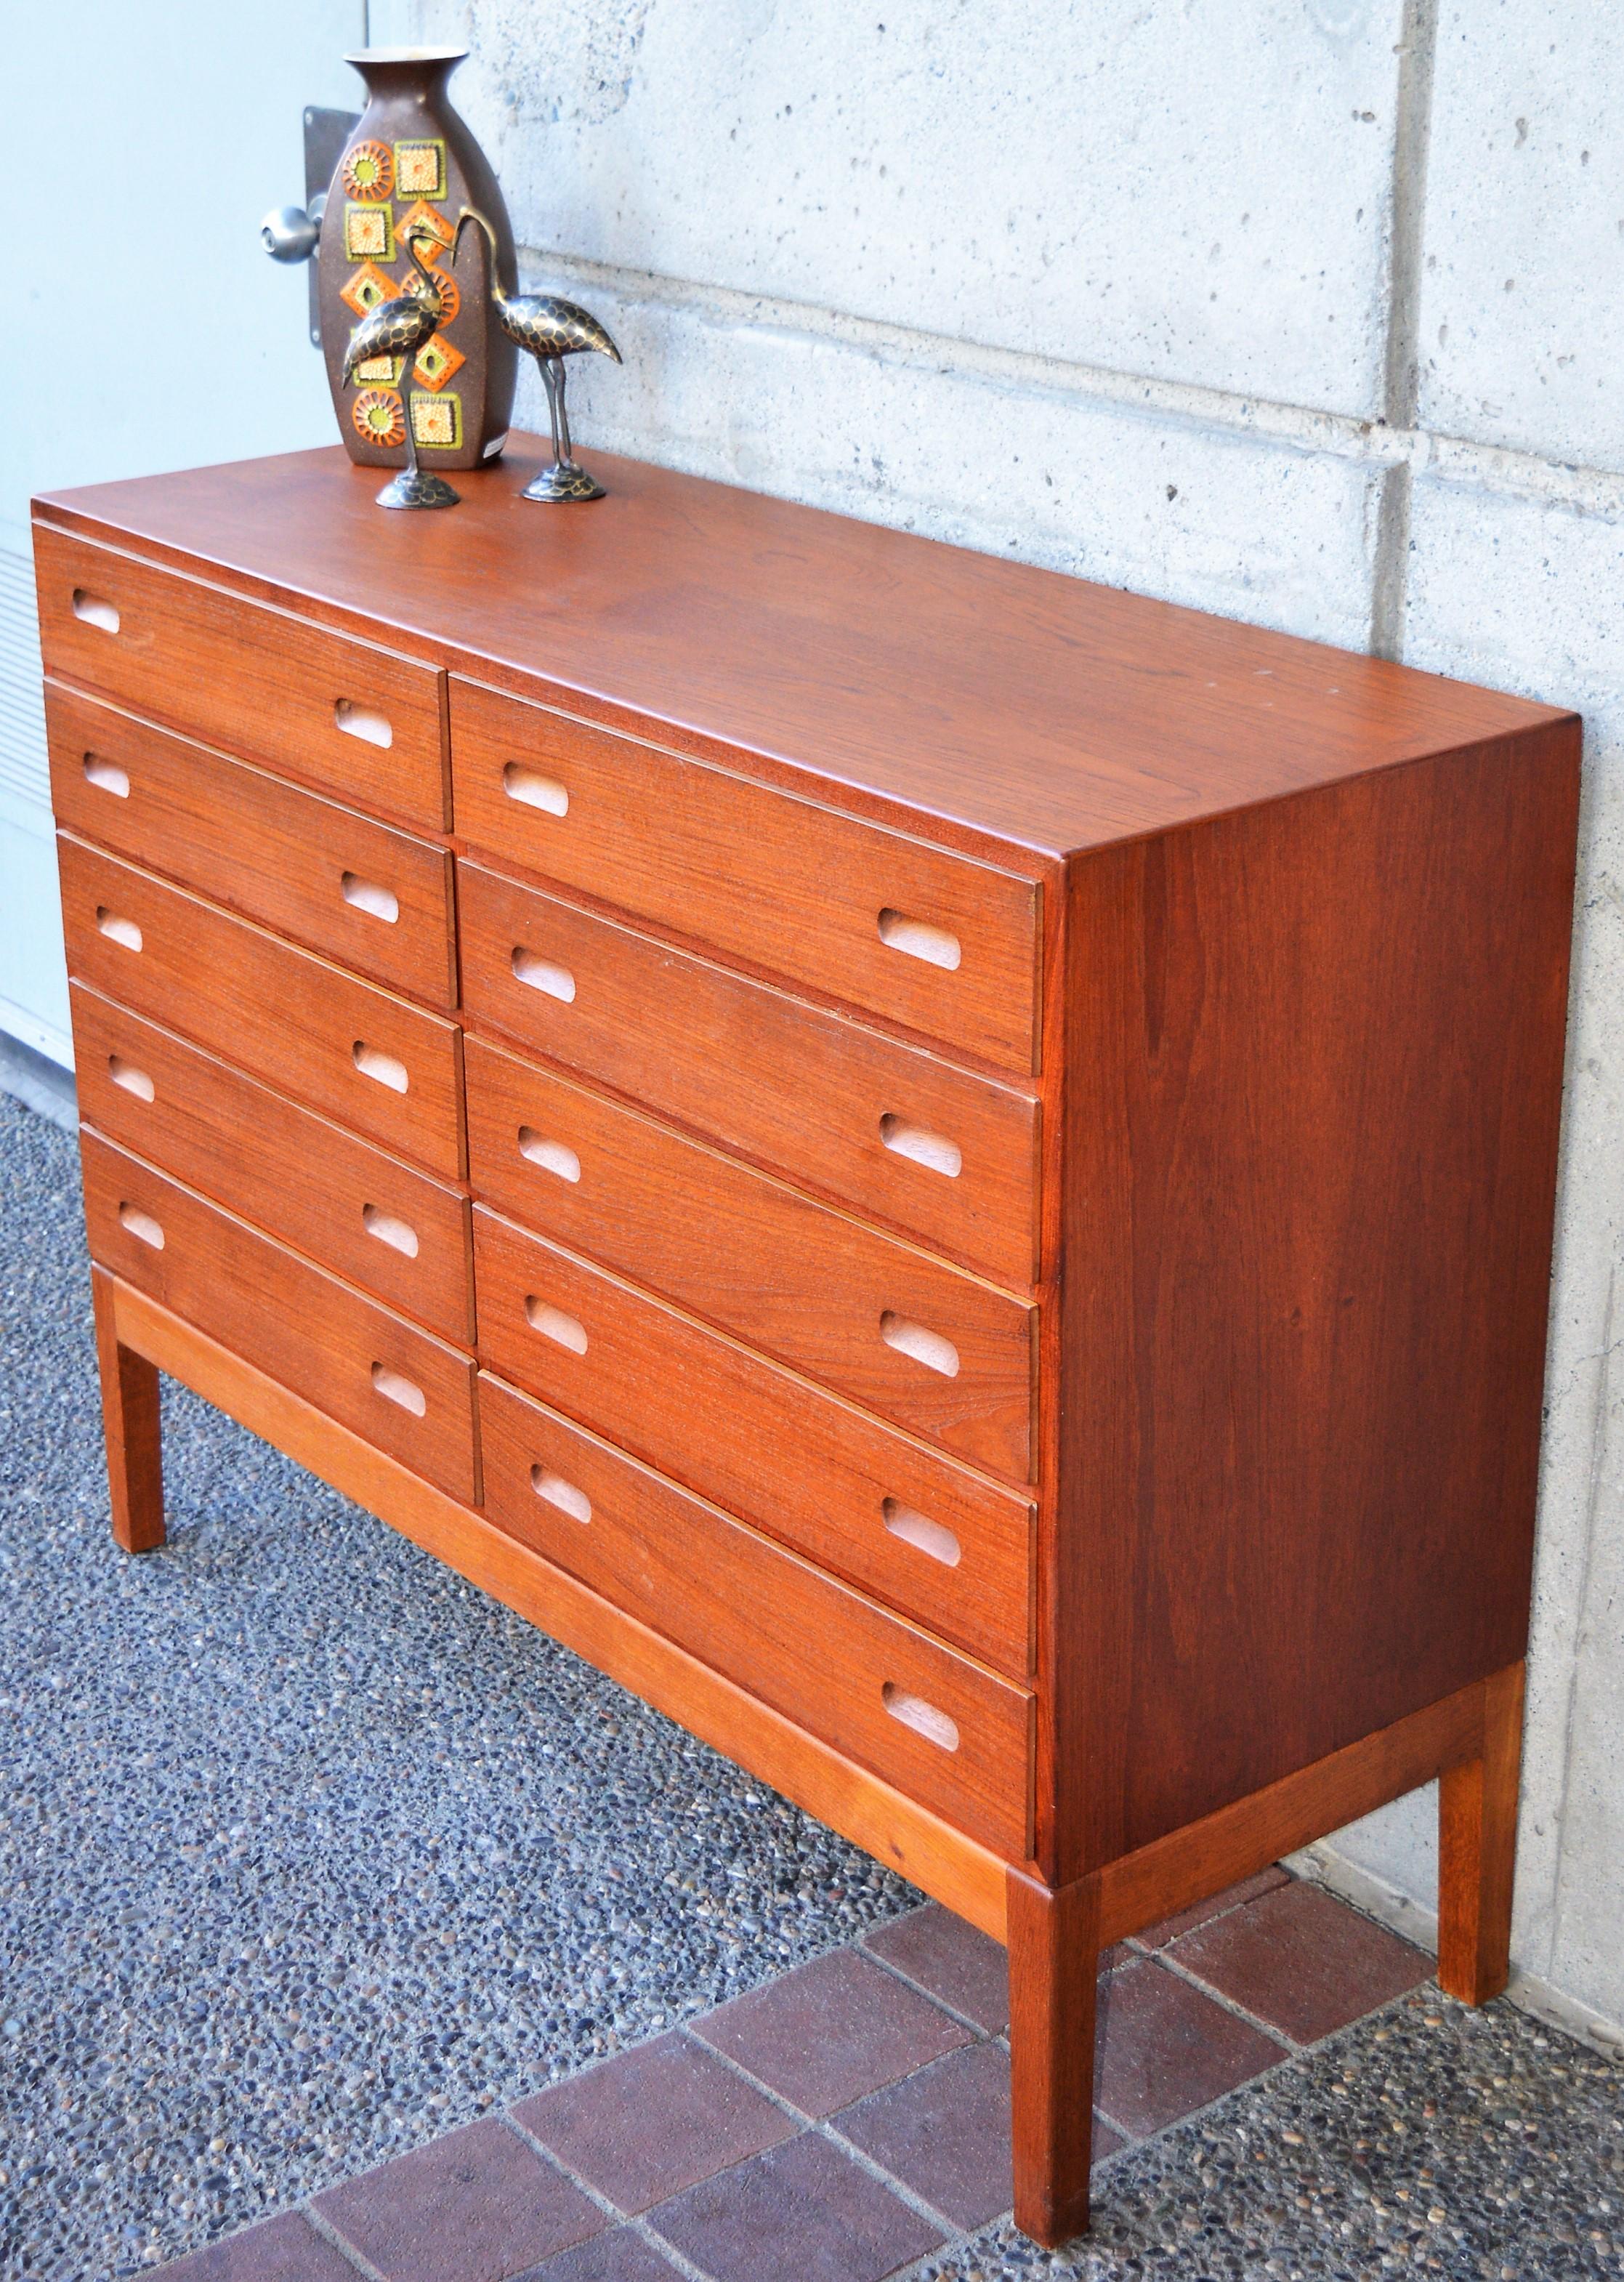 Rare Teak & Oak Borge Mogensen Quality 10-Drawer Dresser with Pedestal Base In Good Condition For Sale In New Westminster, British Columbia